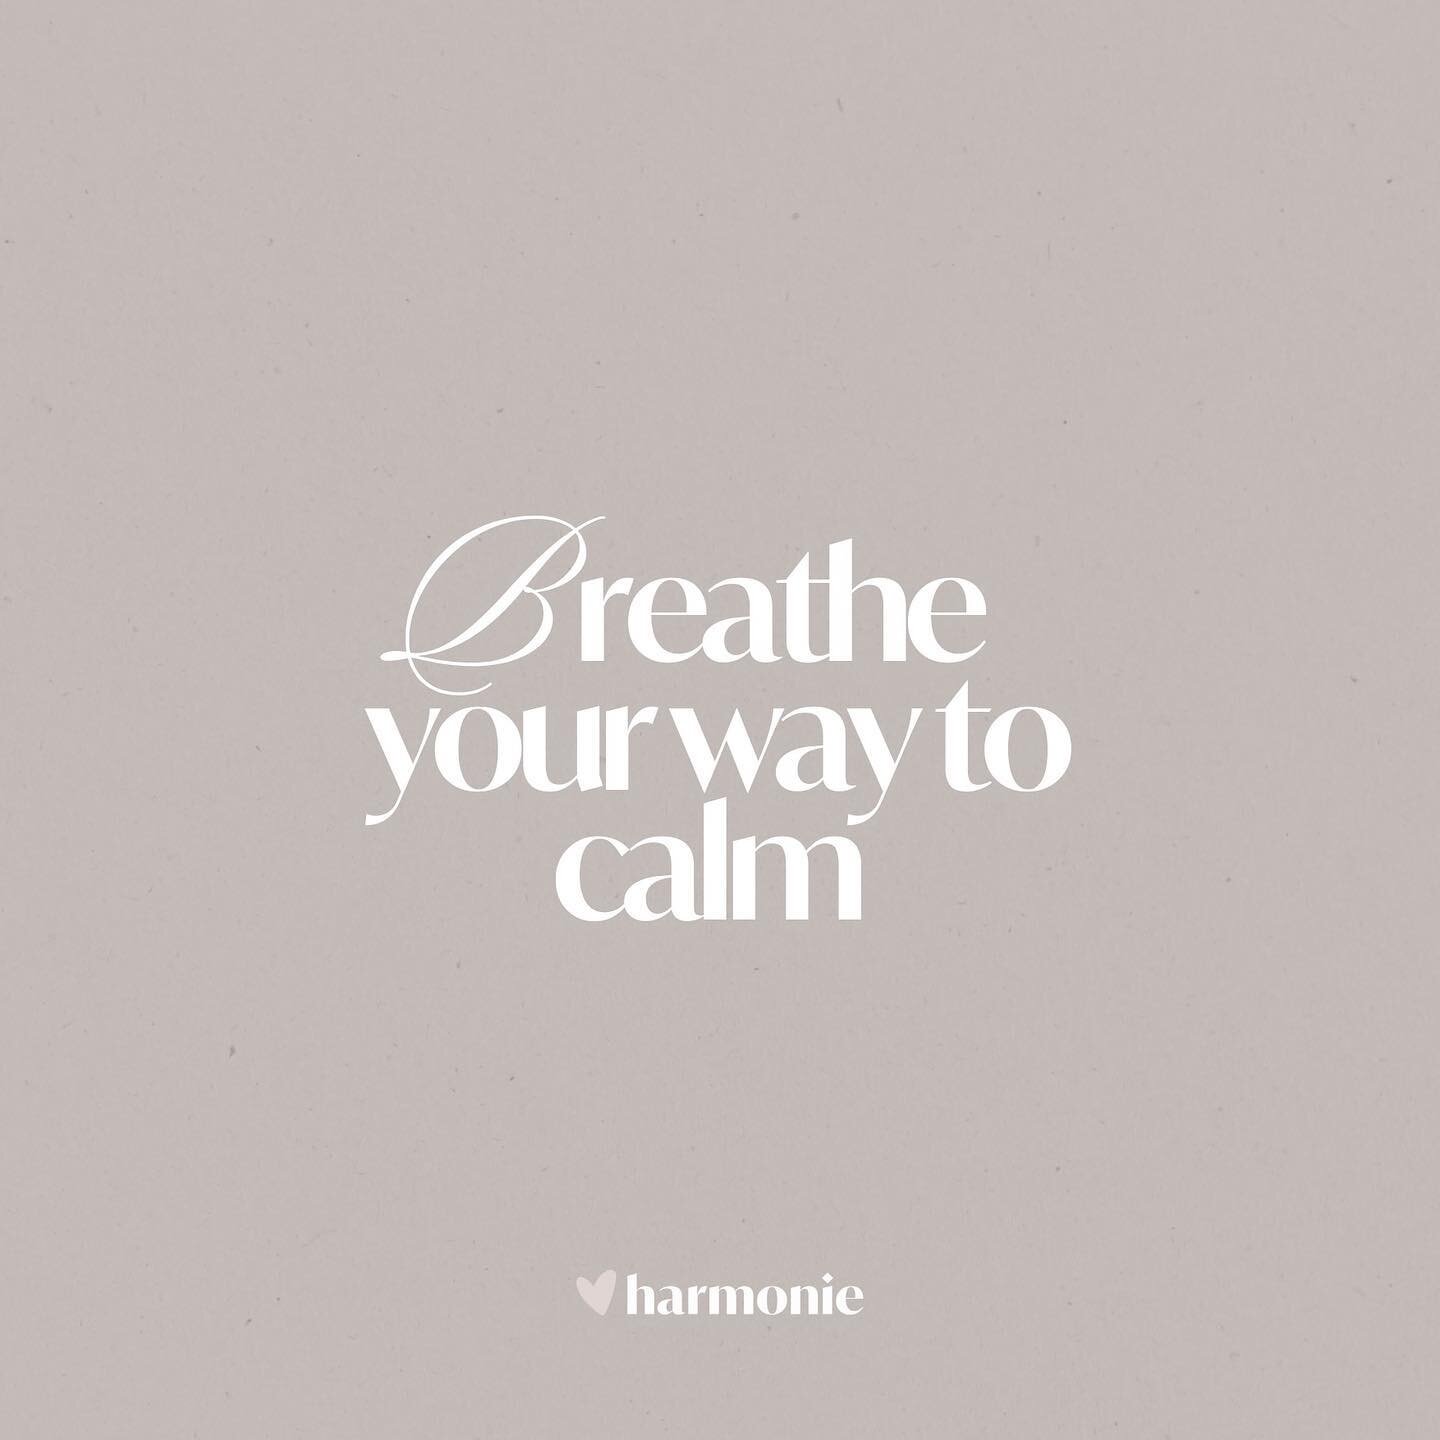 Breathing your way to calm: the power of breathwork for stress reduction. Can you recall a time when breathing helped you overcome a challenge?

Breathwork, or regulated or intentional breathing exercises, can improve the body's stress response syste